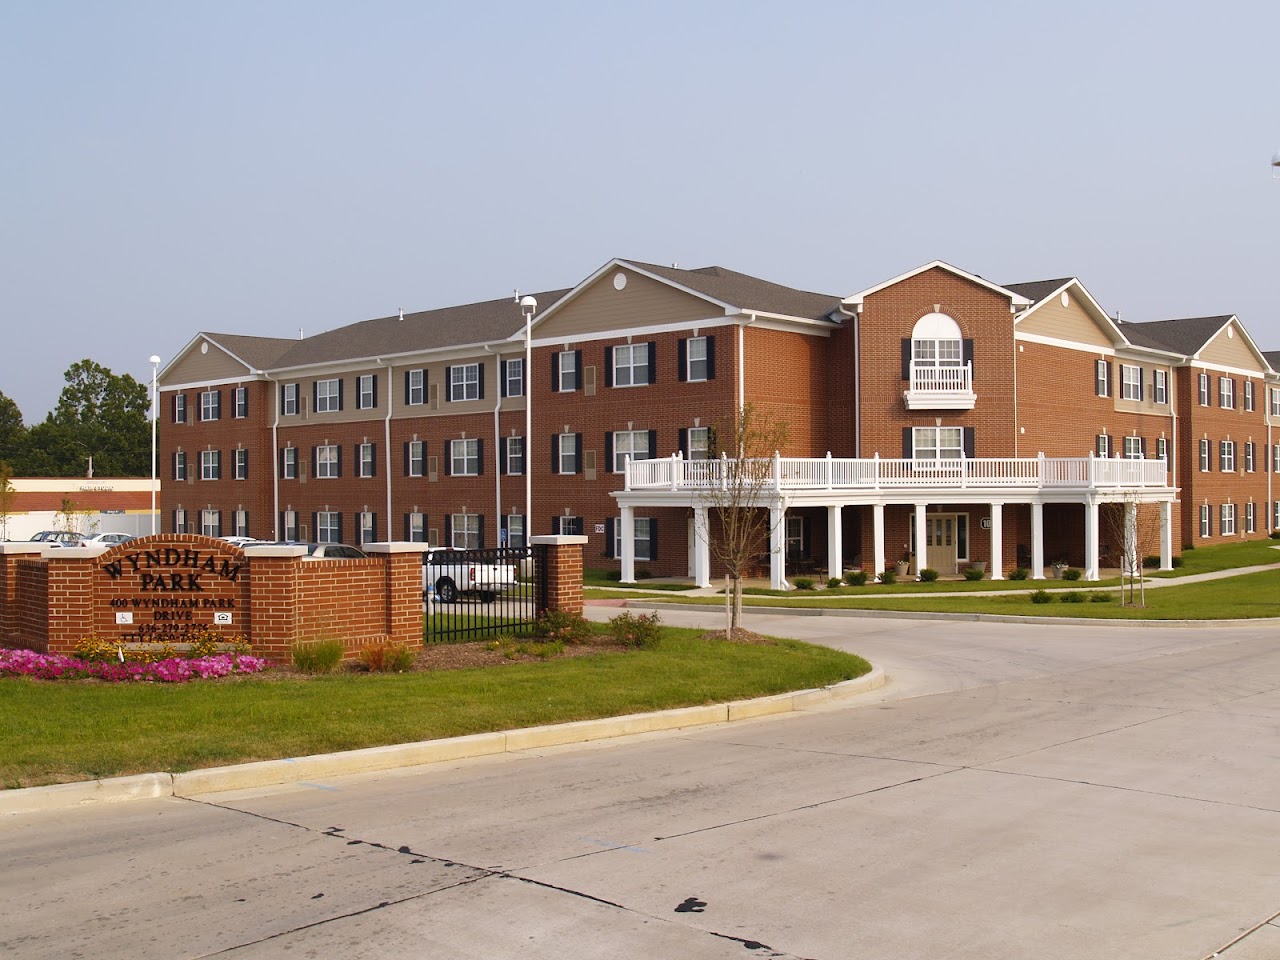 Photo of WYNDHAM PARK II. Affordable housing located at 8000 WYNDHAM PARK DR ST PETERS, MO 63376